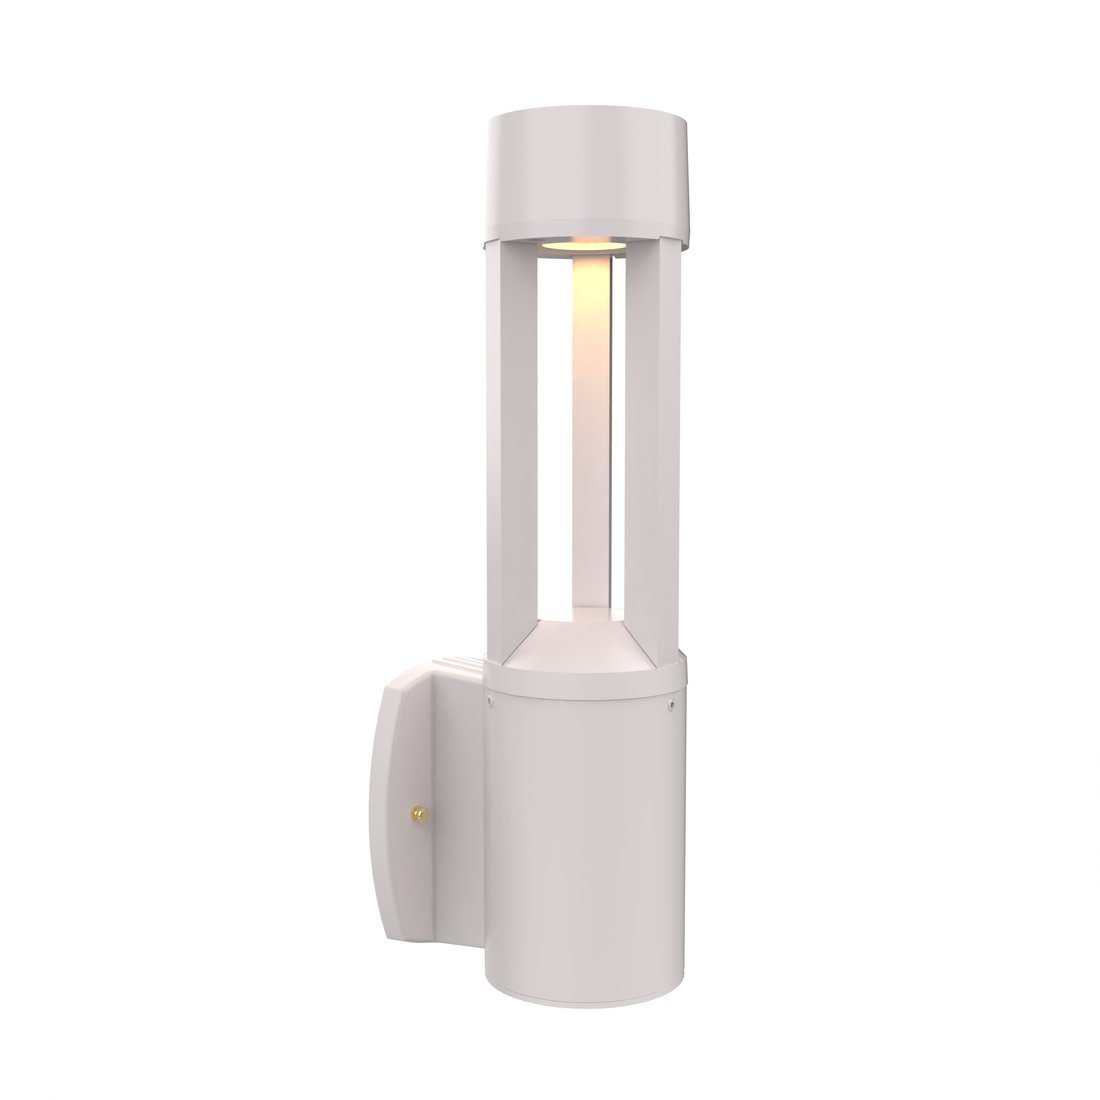 Orlando - Uplight Wall Mount with Integrated LED - 10920